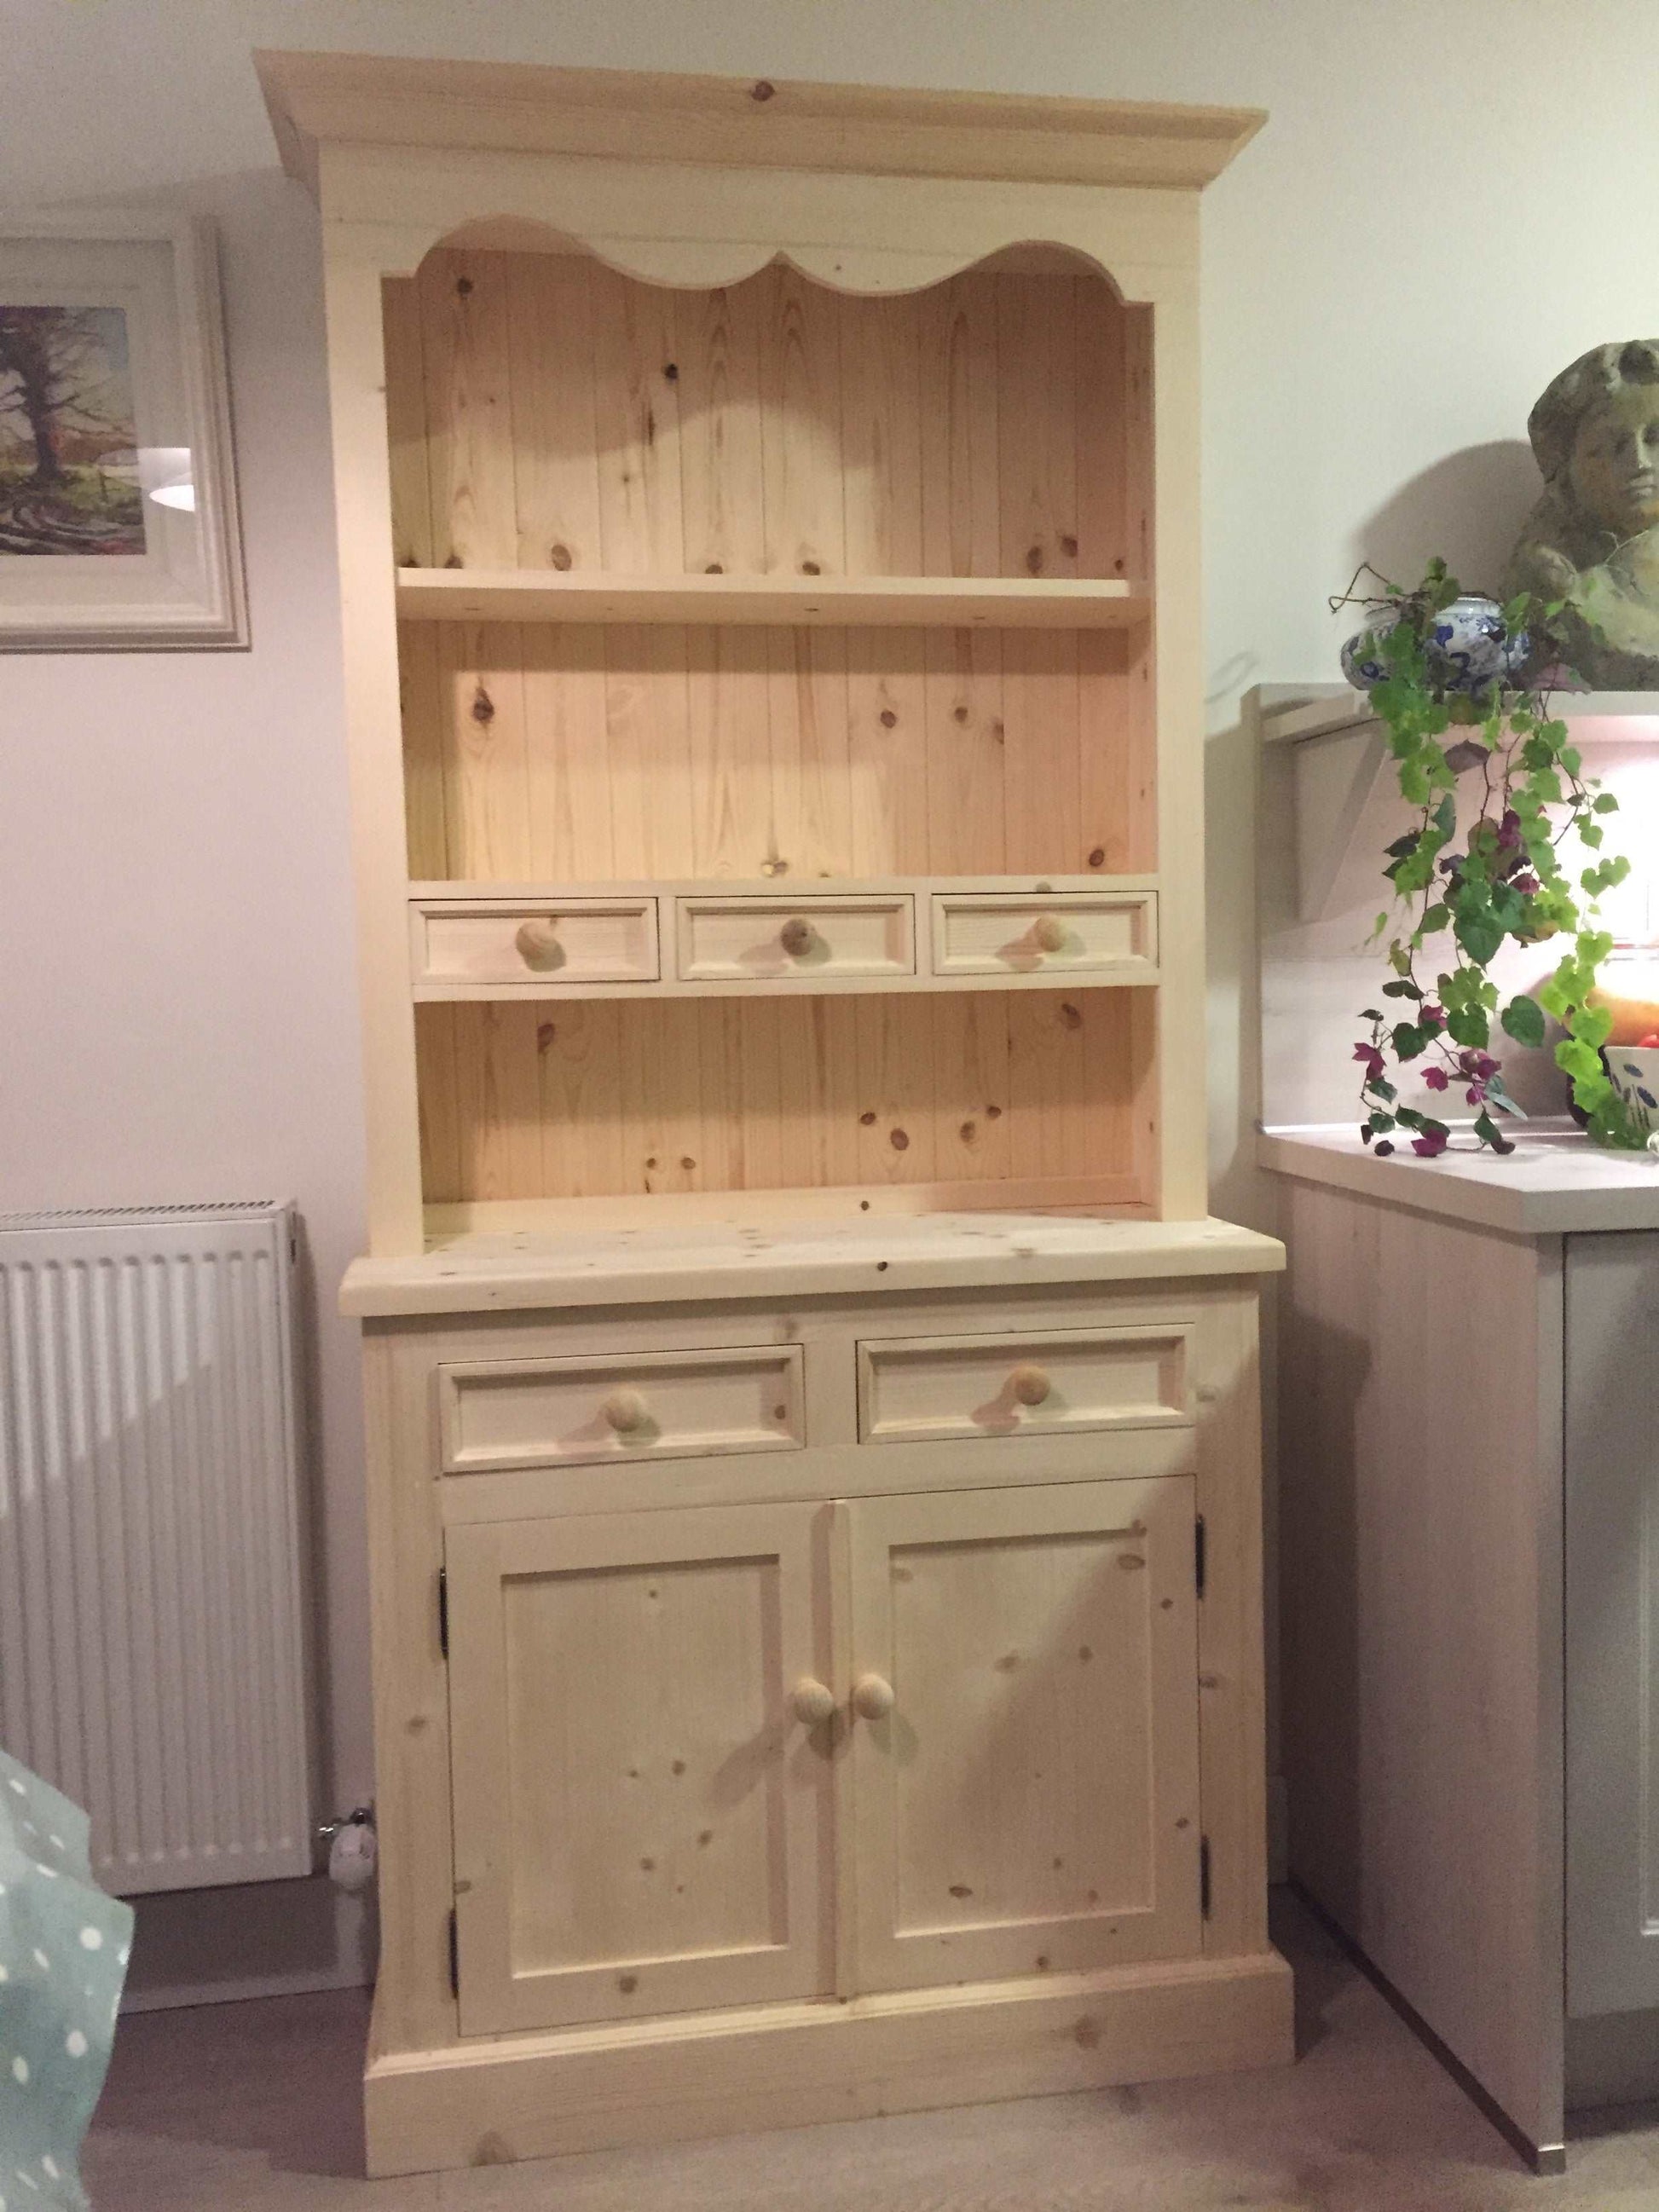 Kitchen Dresser - Open Top with Spice Drawers